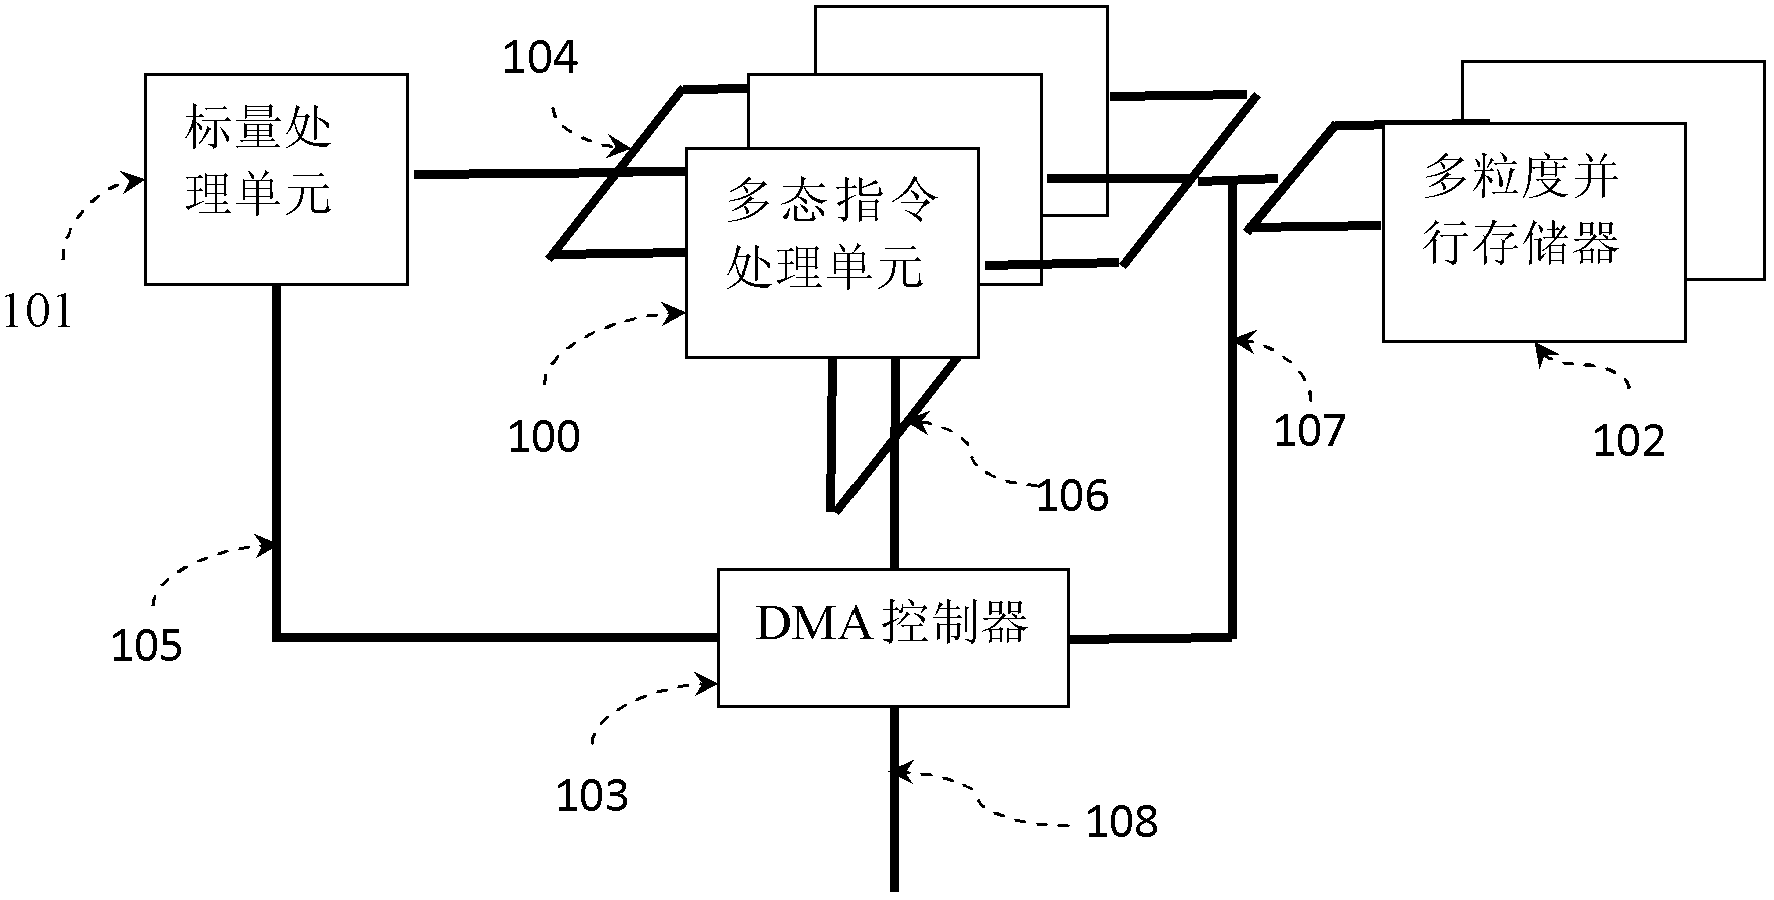 Processor with polymorphic instruction set architecture